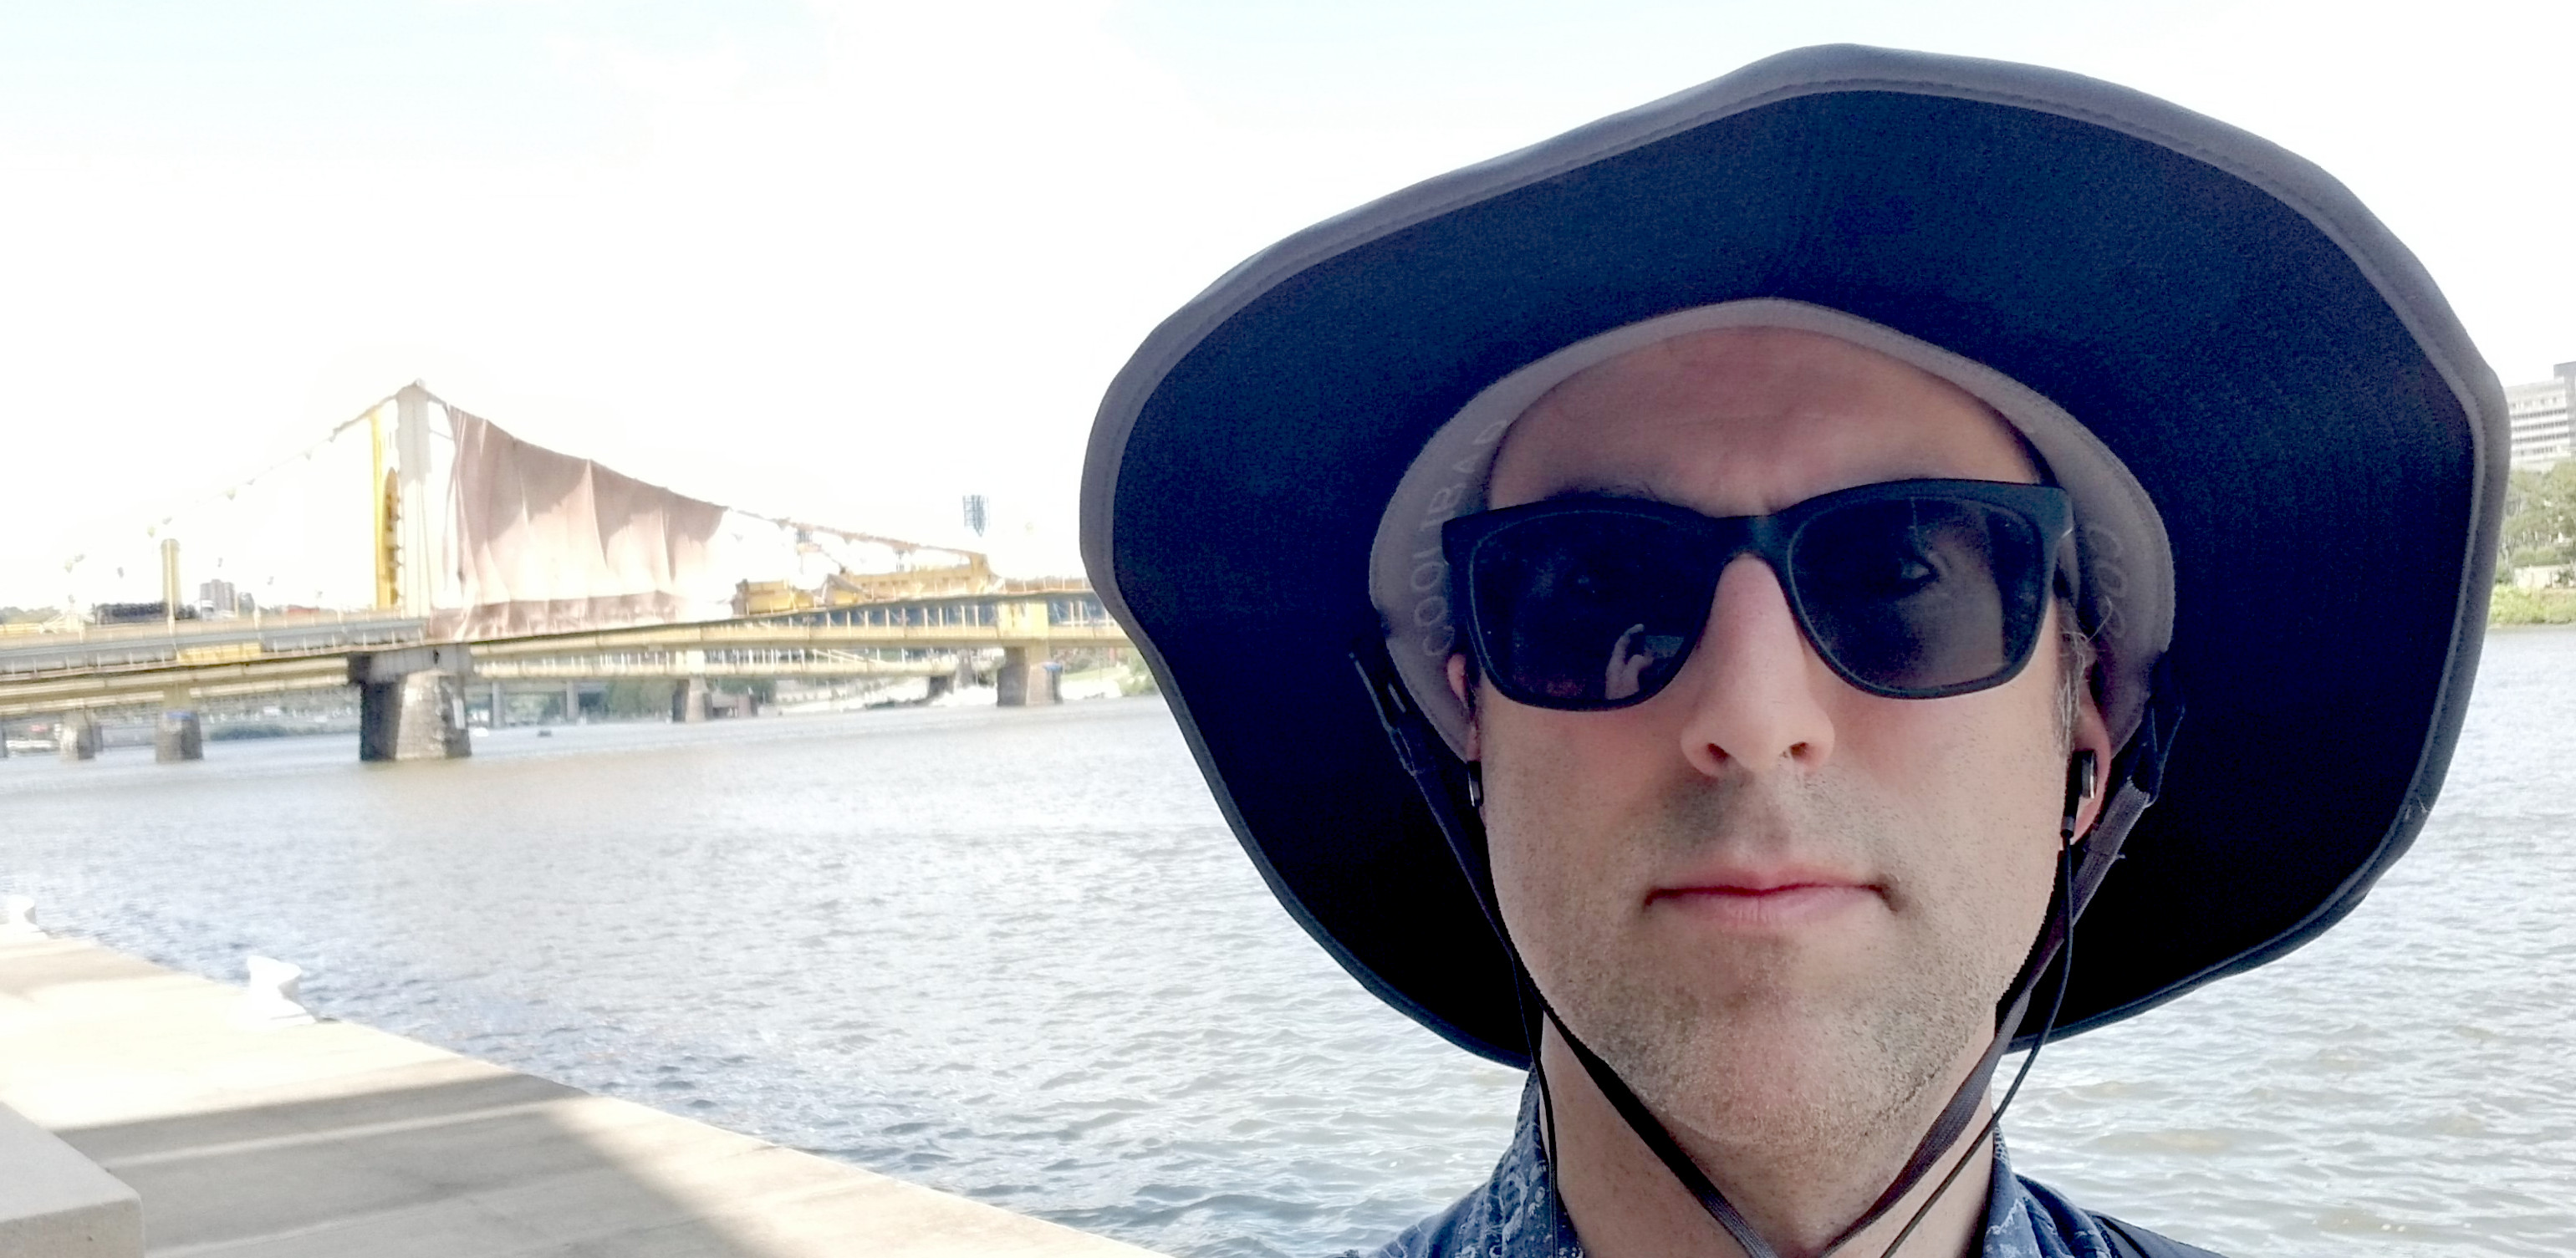 Me on the waterfront in a big hat in front of a bridge